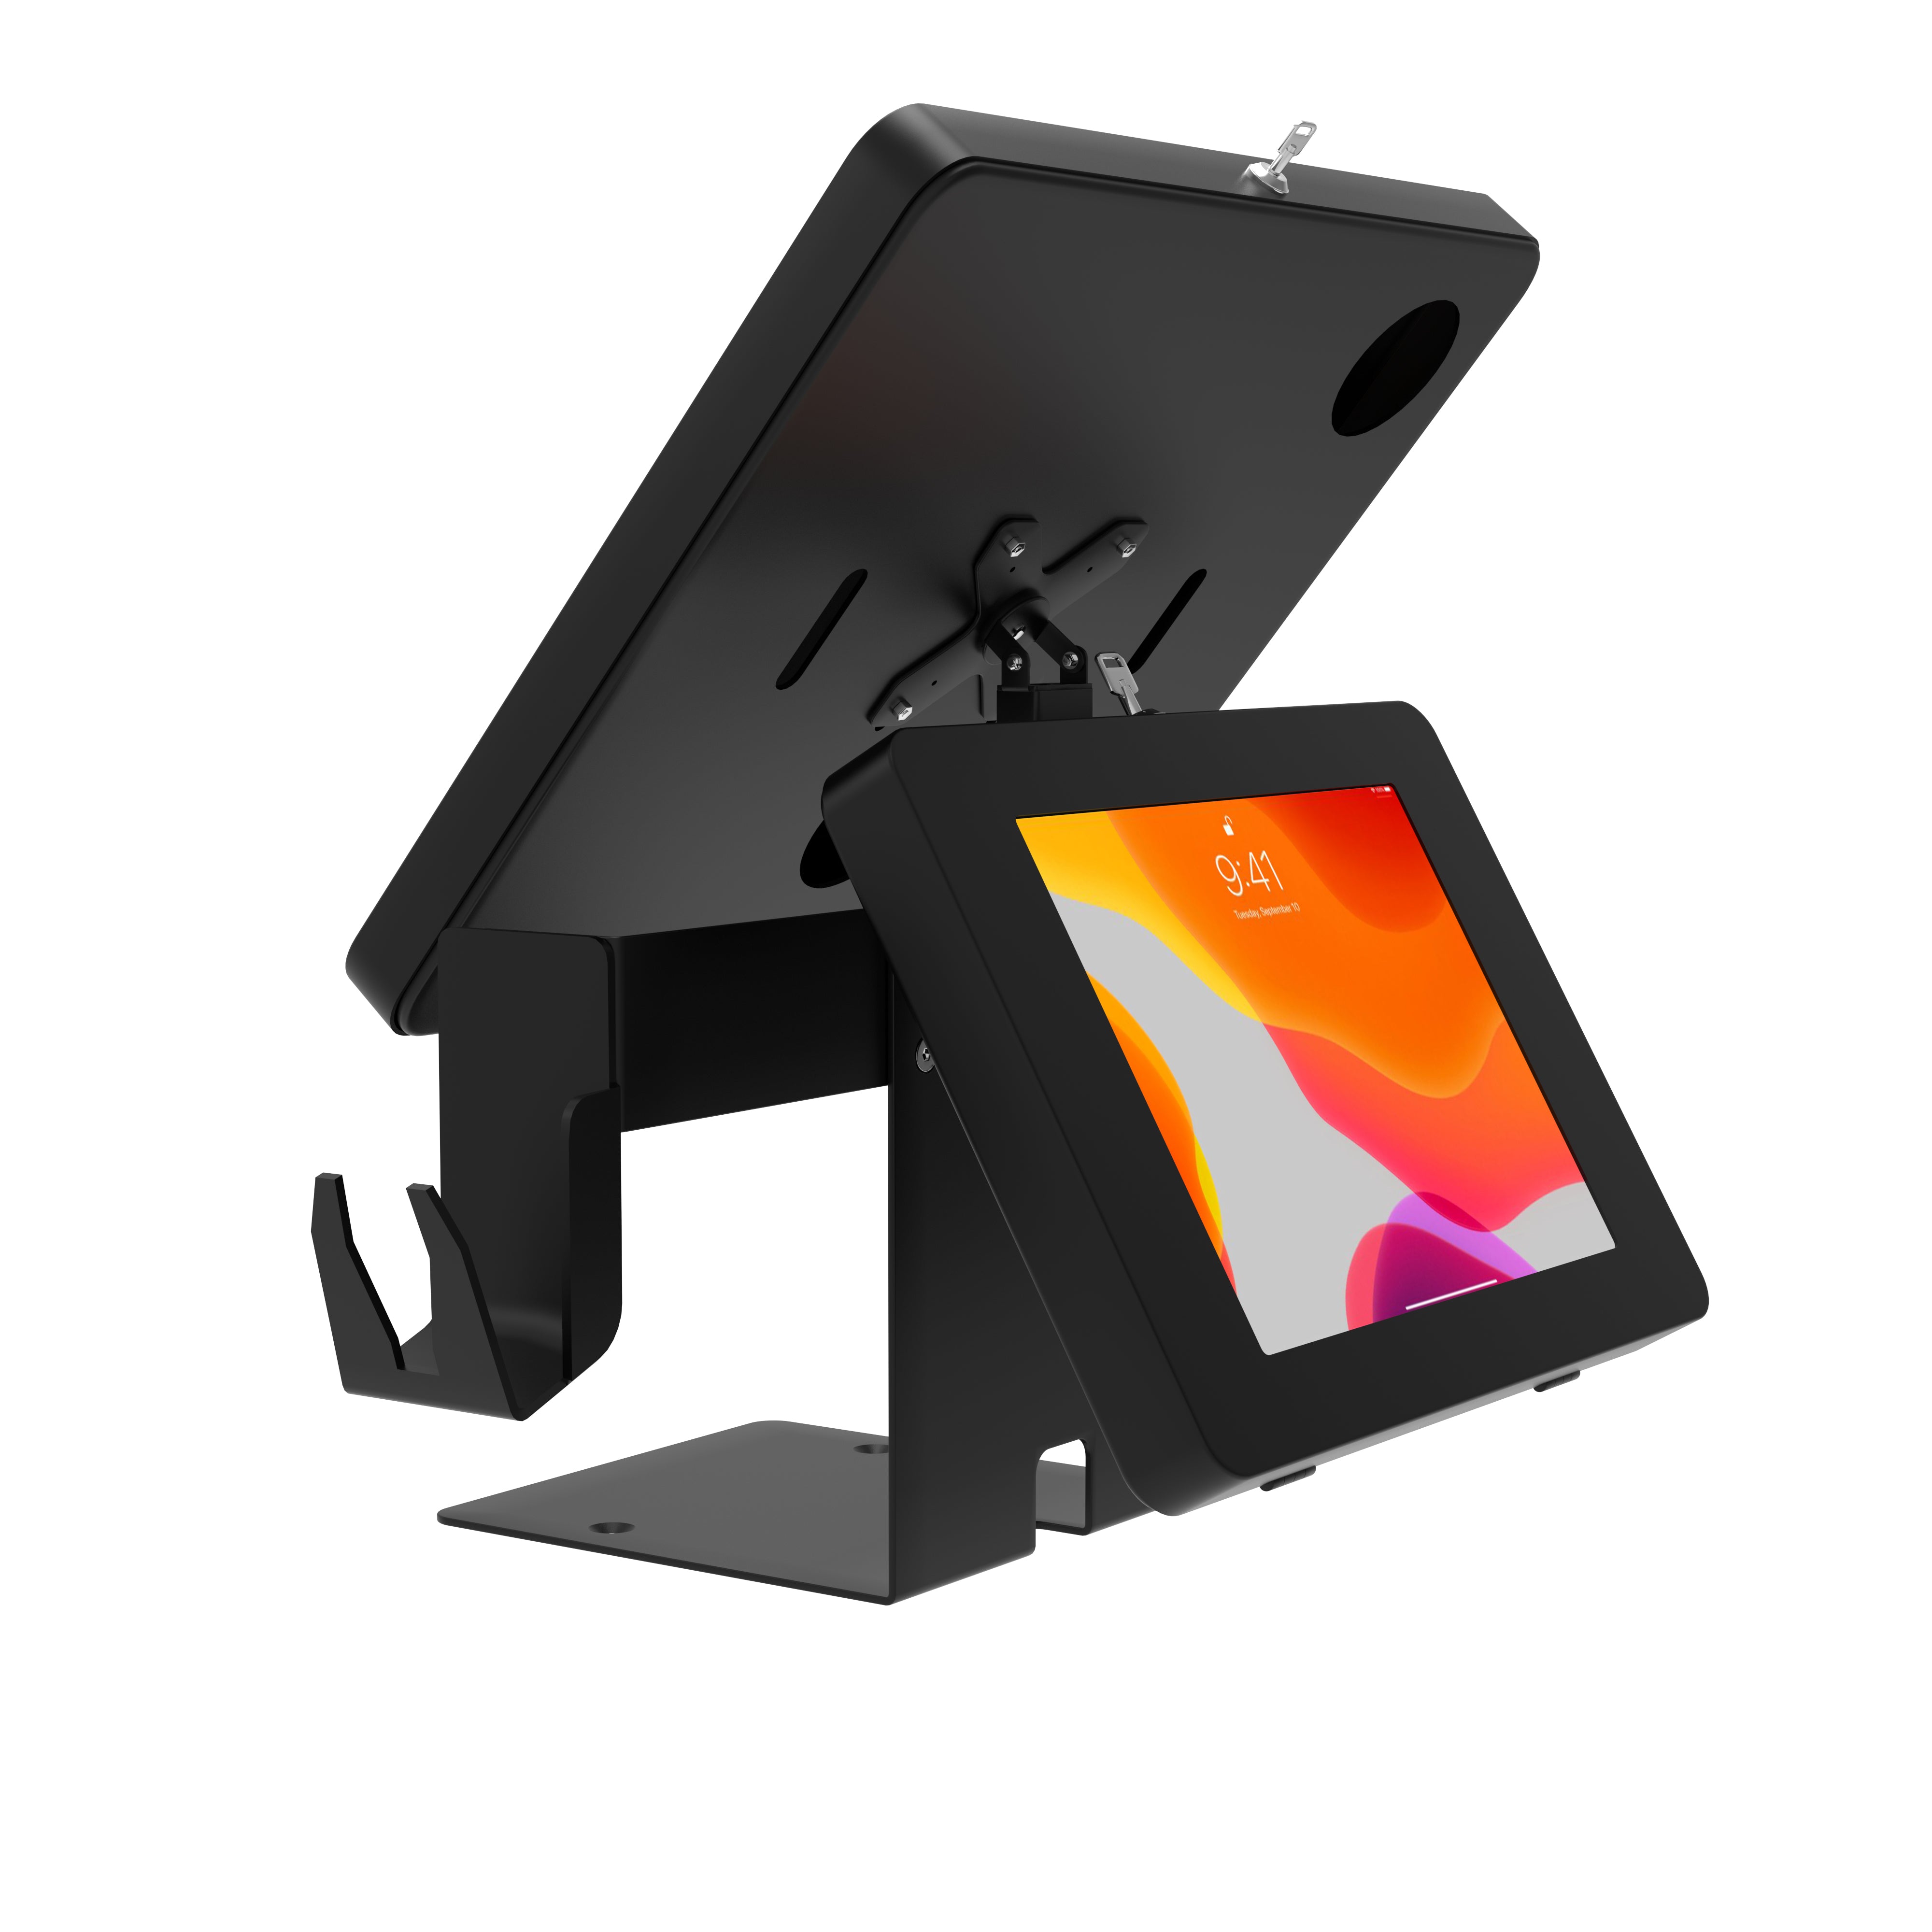 POS Station with Printer Stand, Magnetic Scanner Holder, Card Reader Holder & 2 Security Enclosures for iPad Air 11 inch - M2, iPad Pro 11 inch - M4 & more